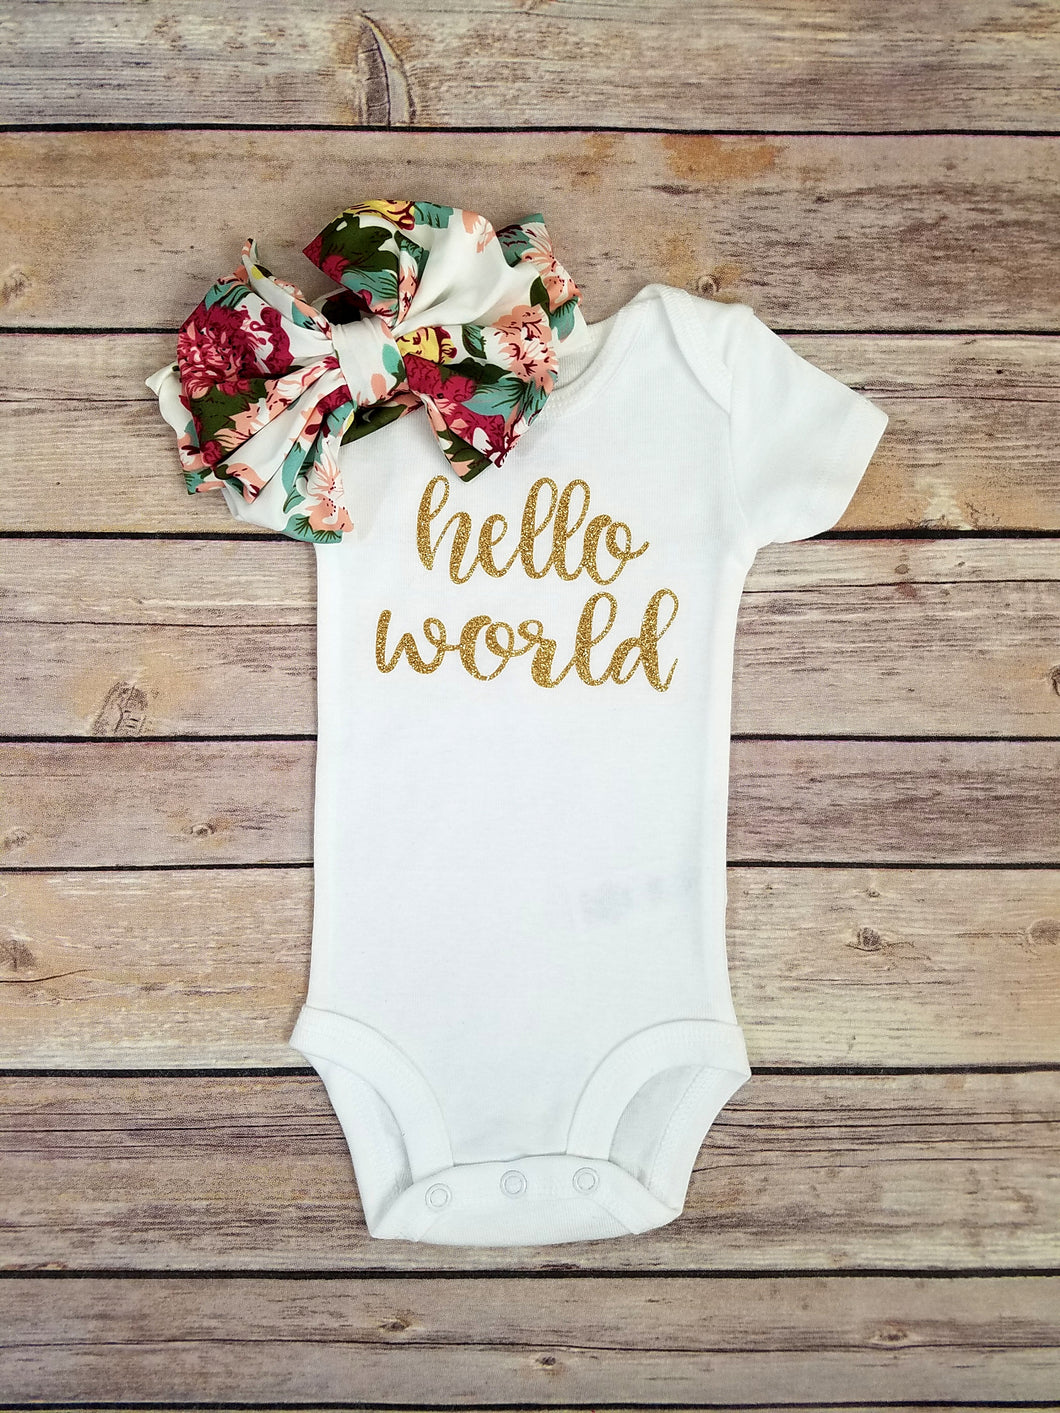 Charlie Hello World Onesie And Floral Headband Coming Home Outfit Girl - Adassa Rose